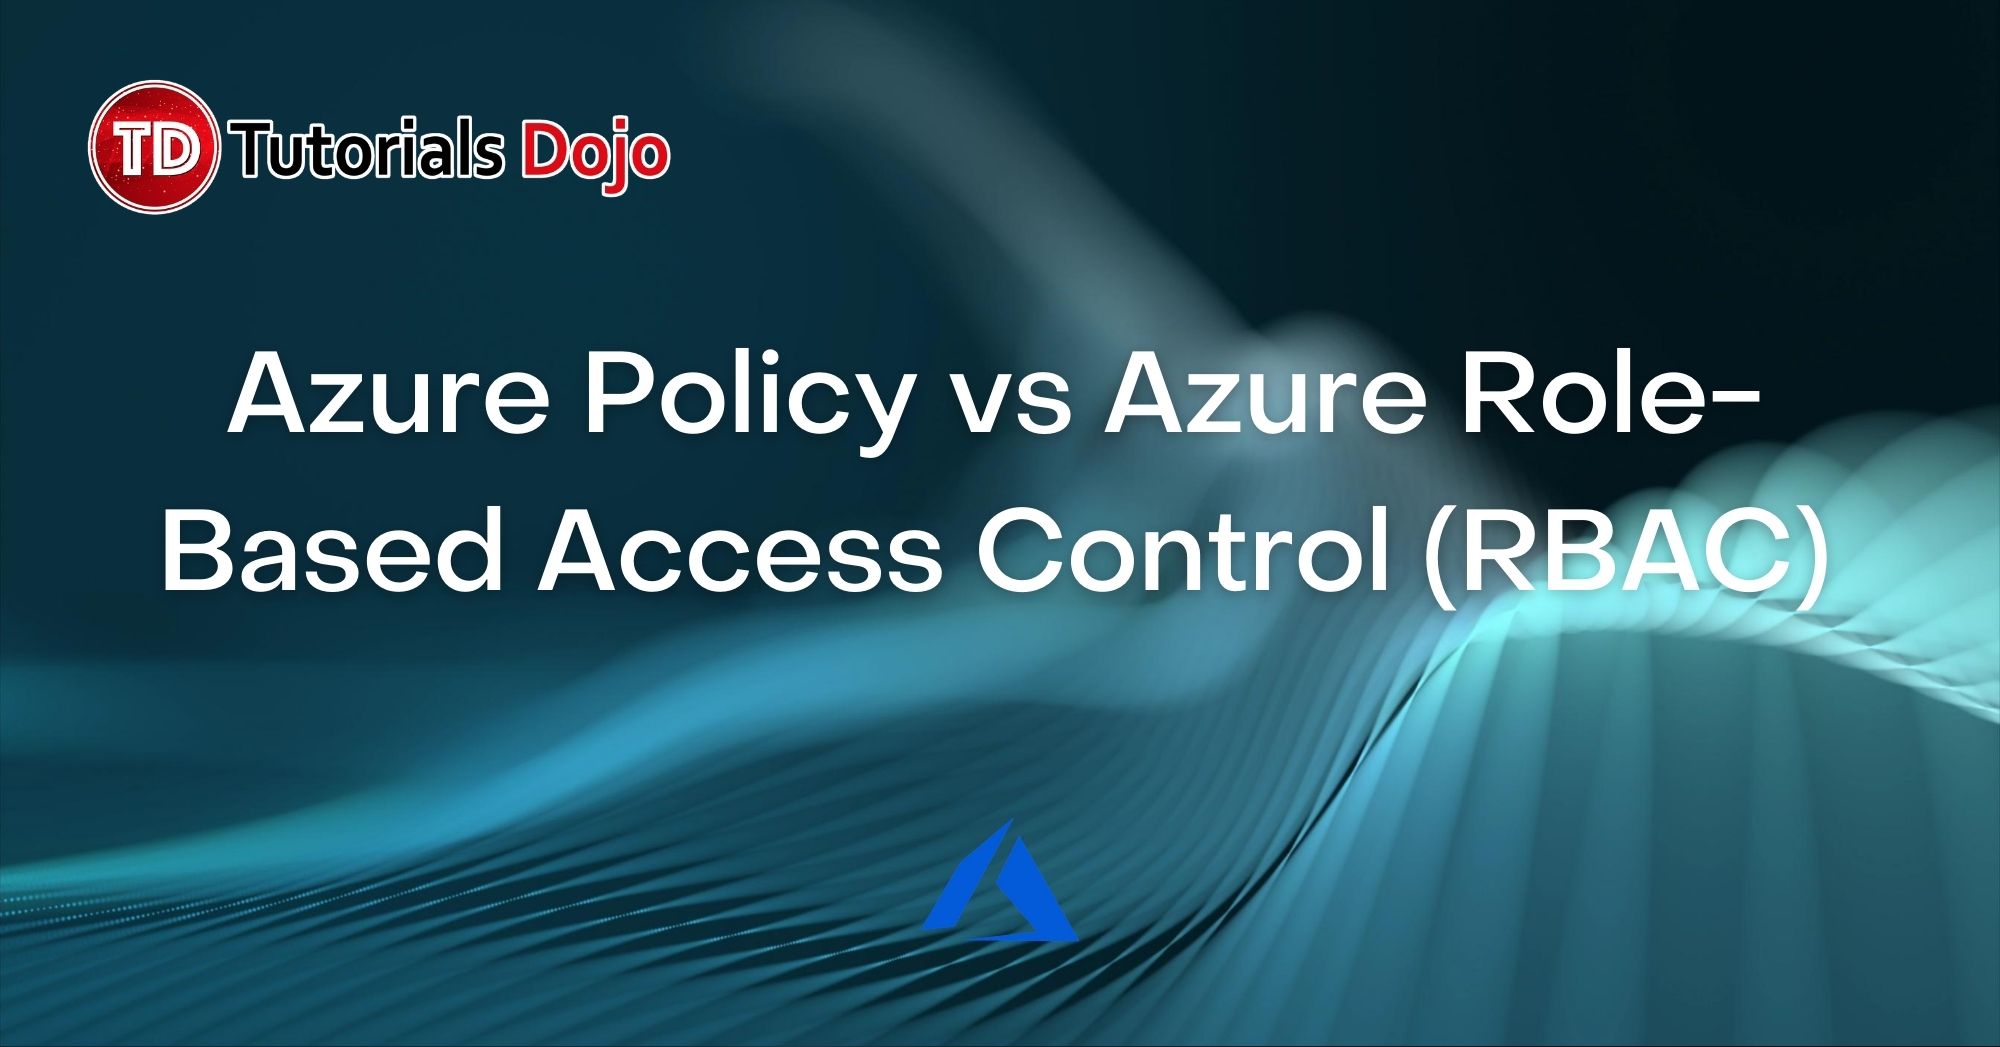 Azure Policy vs Azure Role-Based Access Control (RBAC)